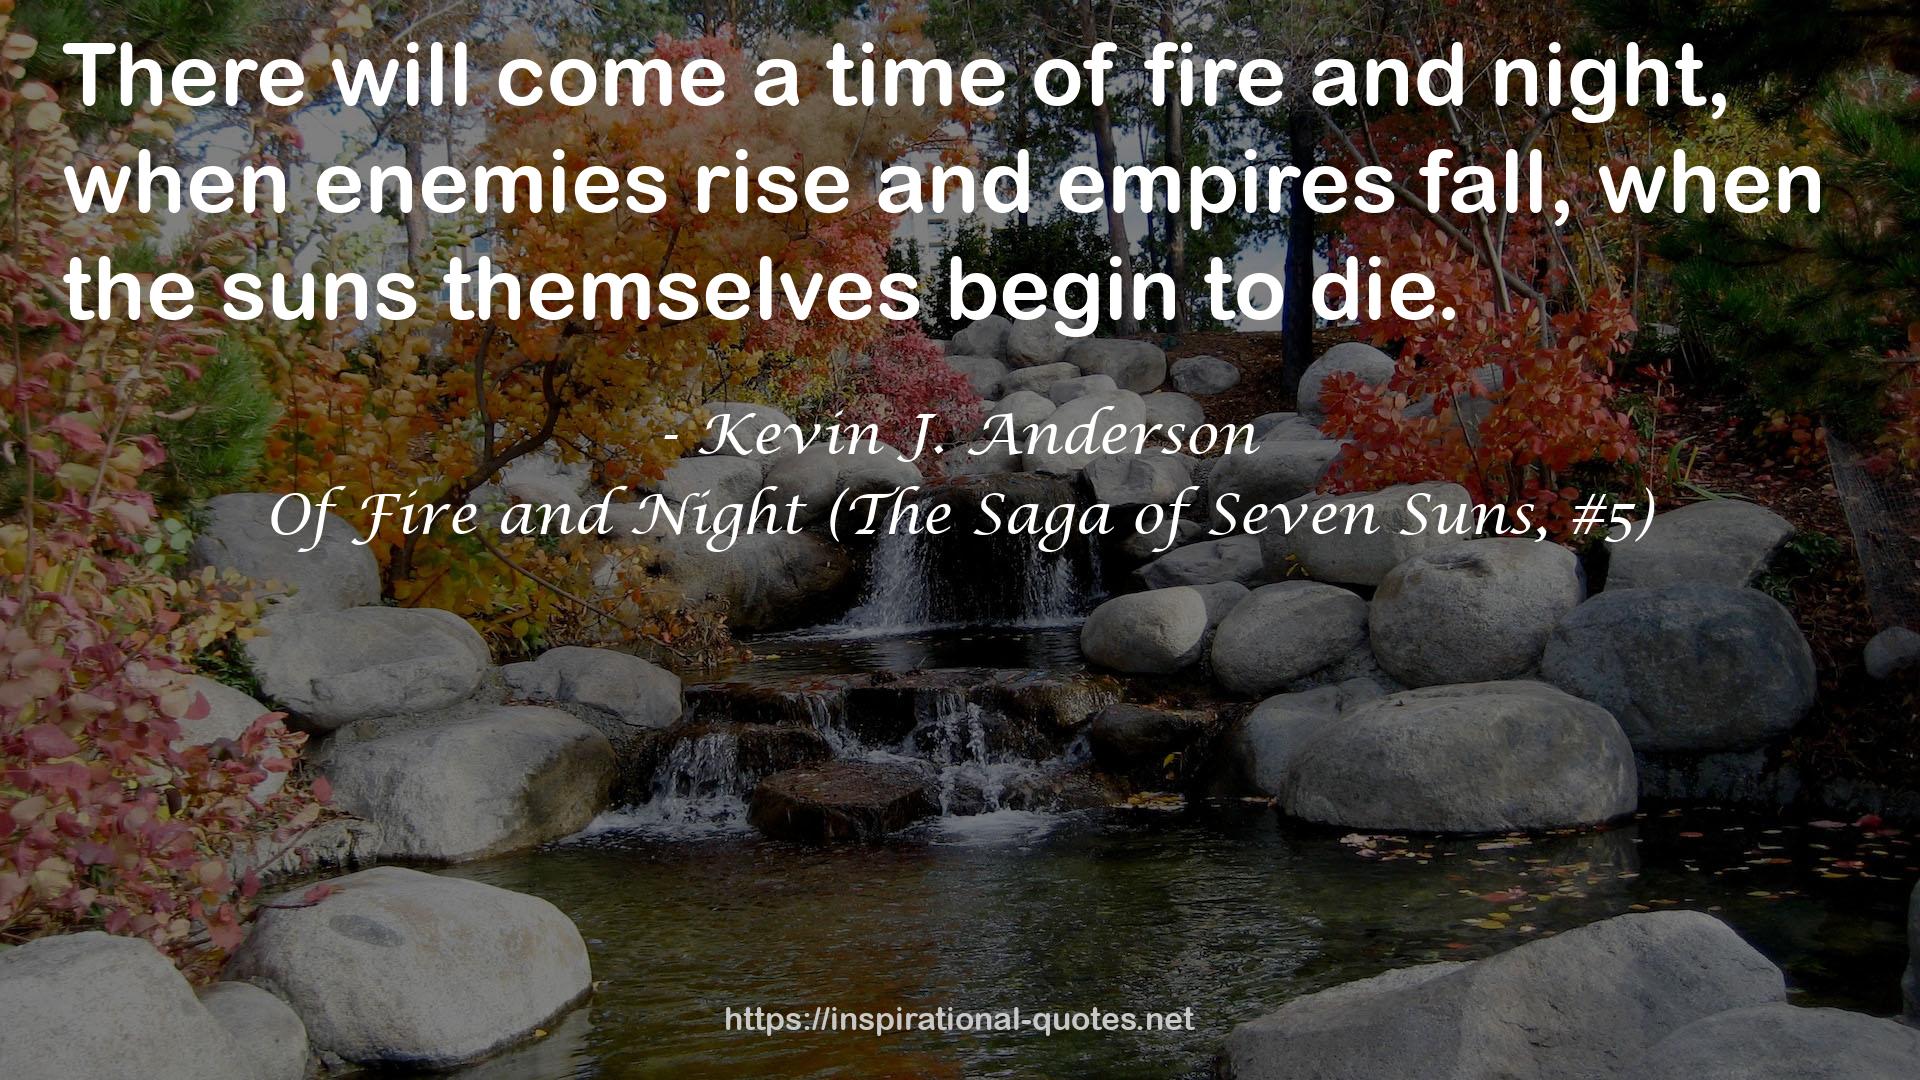 Of Fire and Night (The Saga of Seven Suns, #5) QUOTES